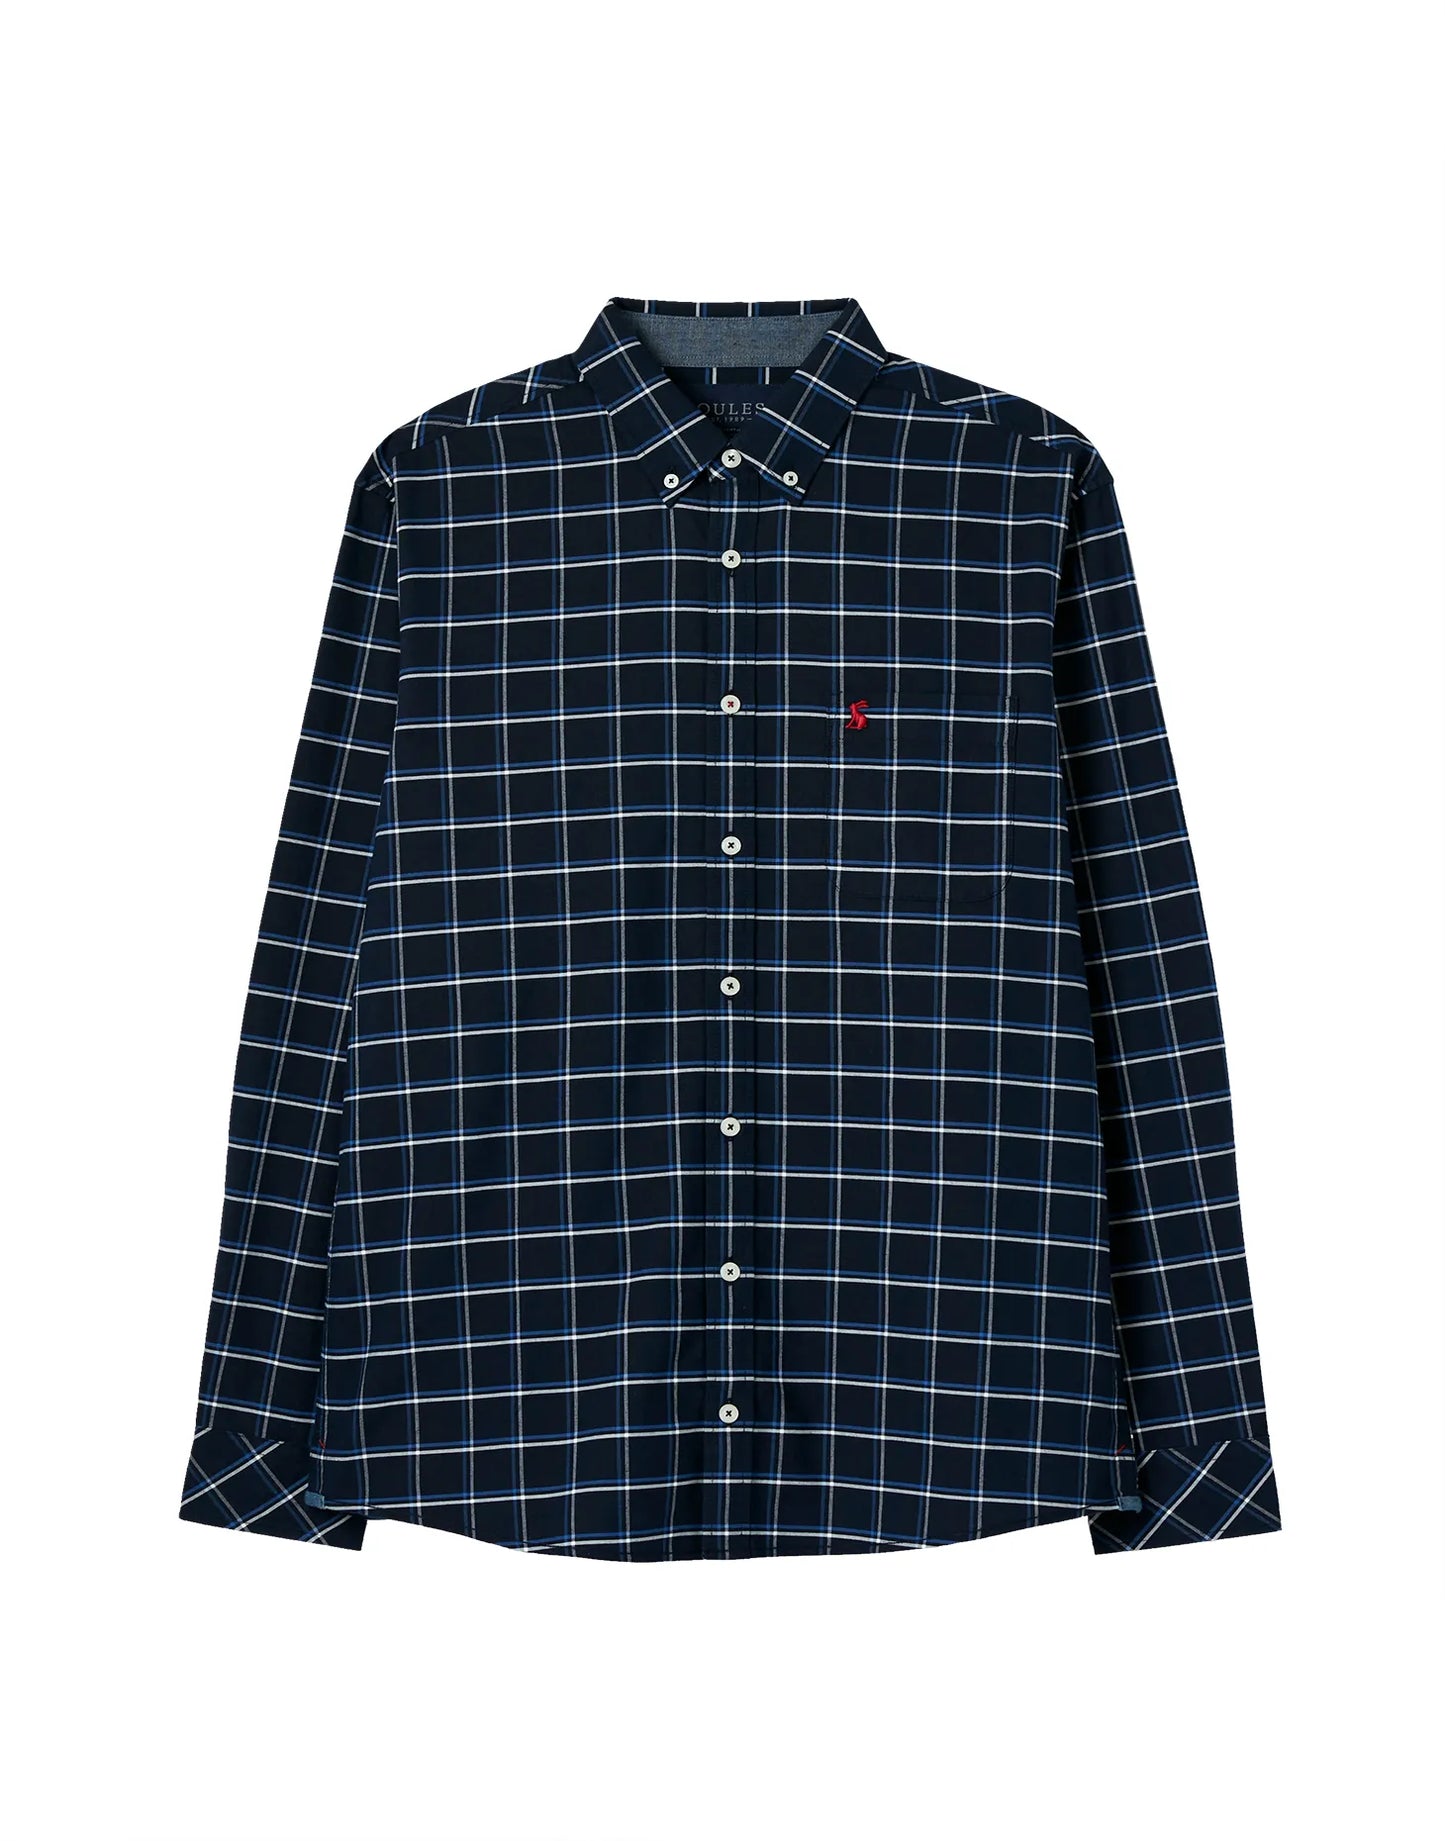 Welford Classic Fit Check Shirt - Navy Blue Check